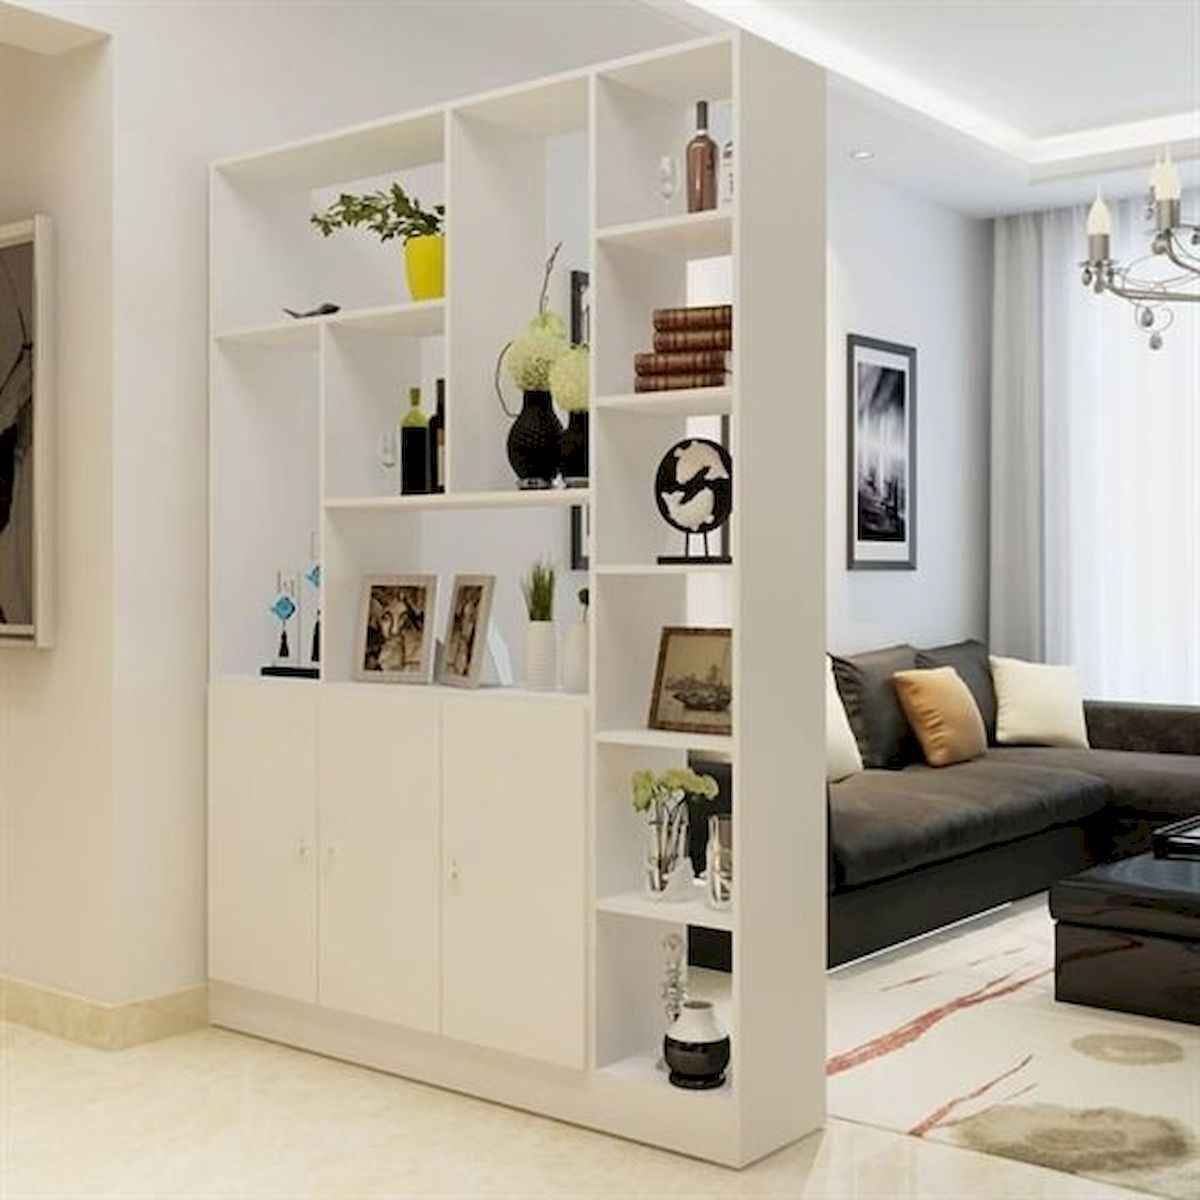 Room Partition for Storage